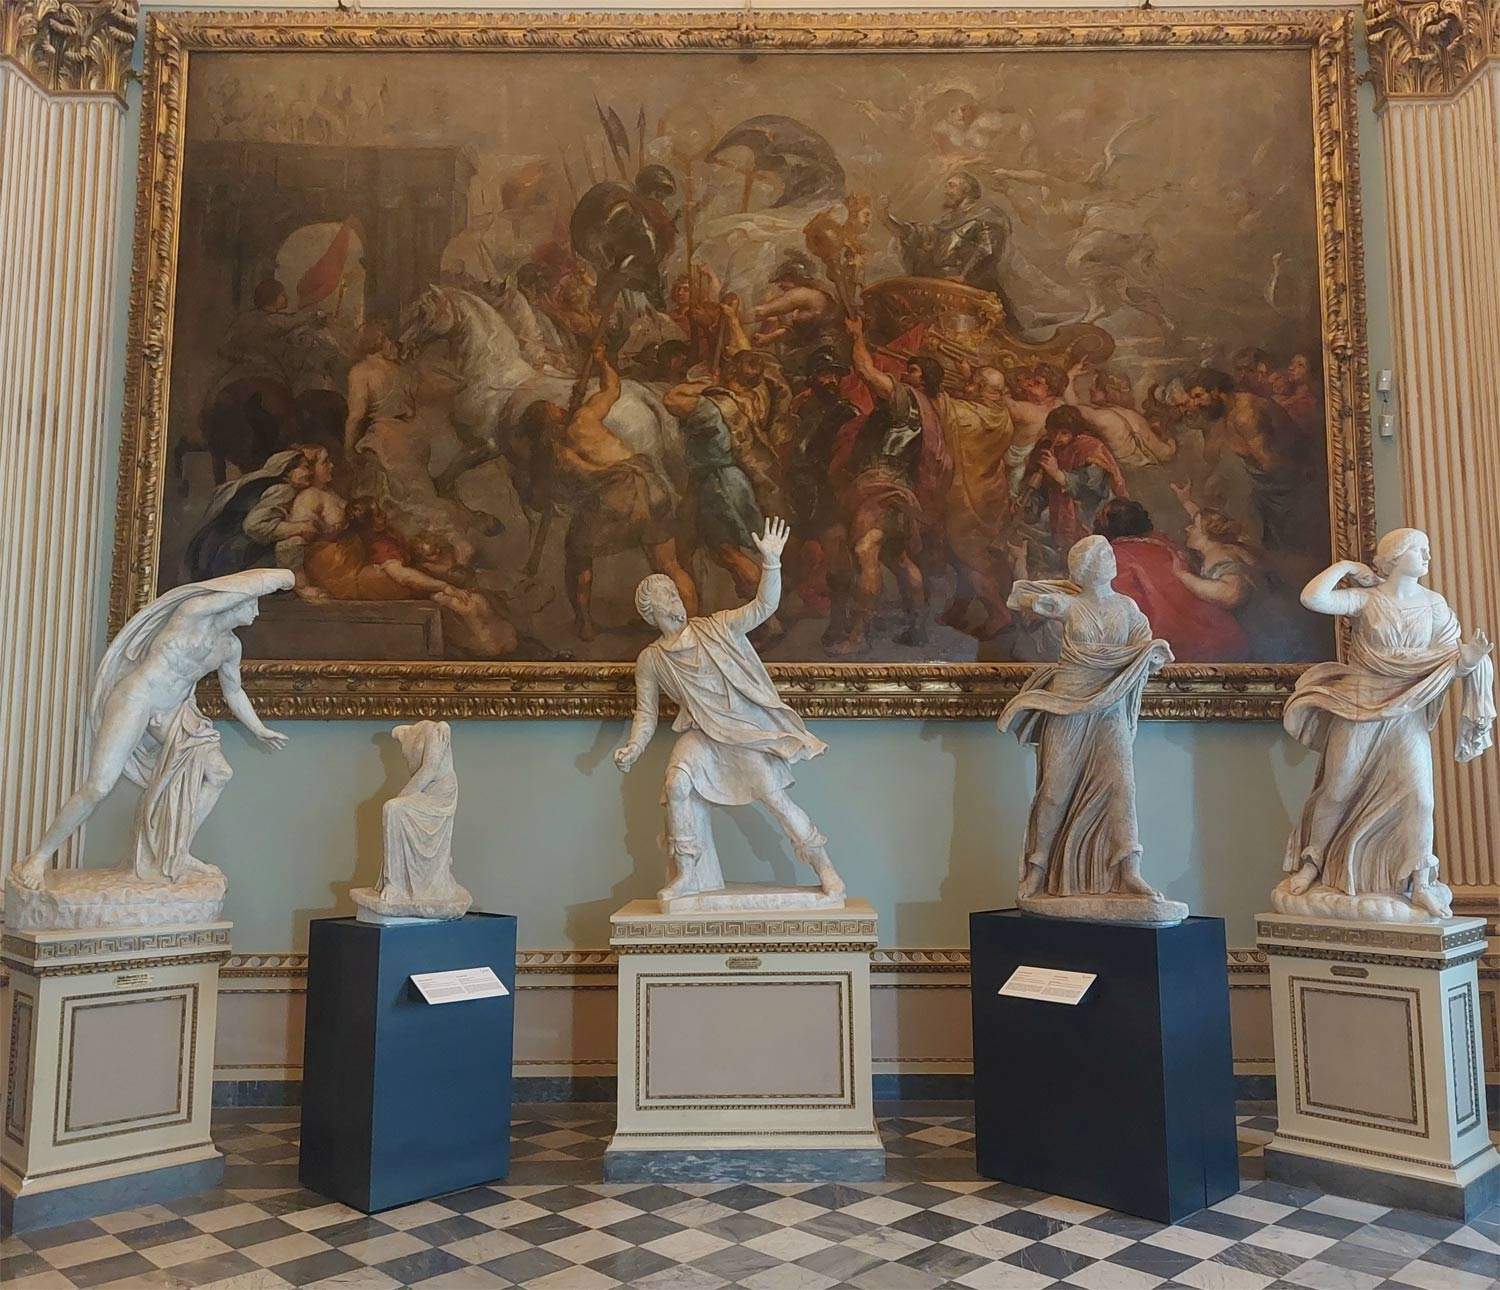 Comparison of two groups of Niobids on display at the Uffizi